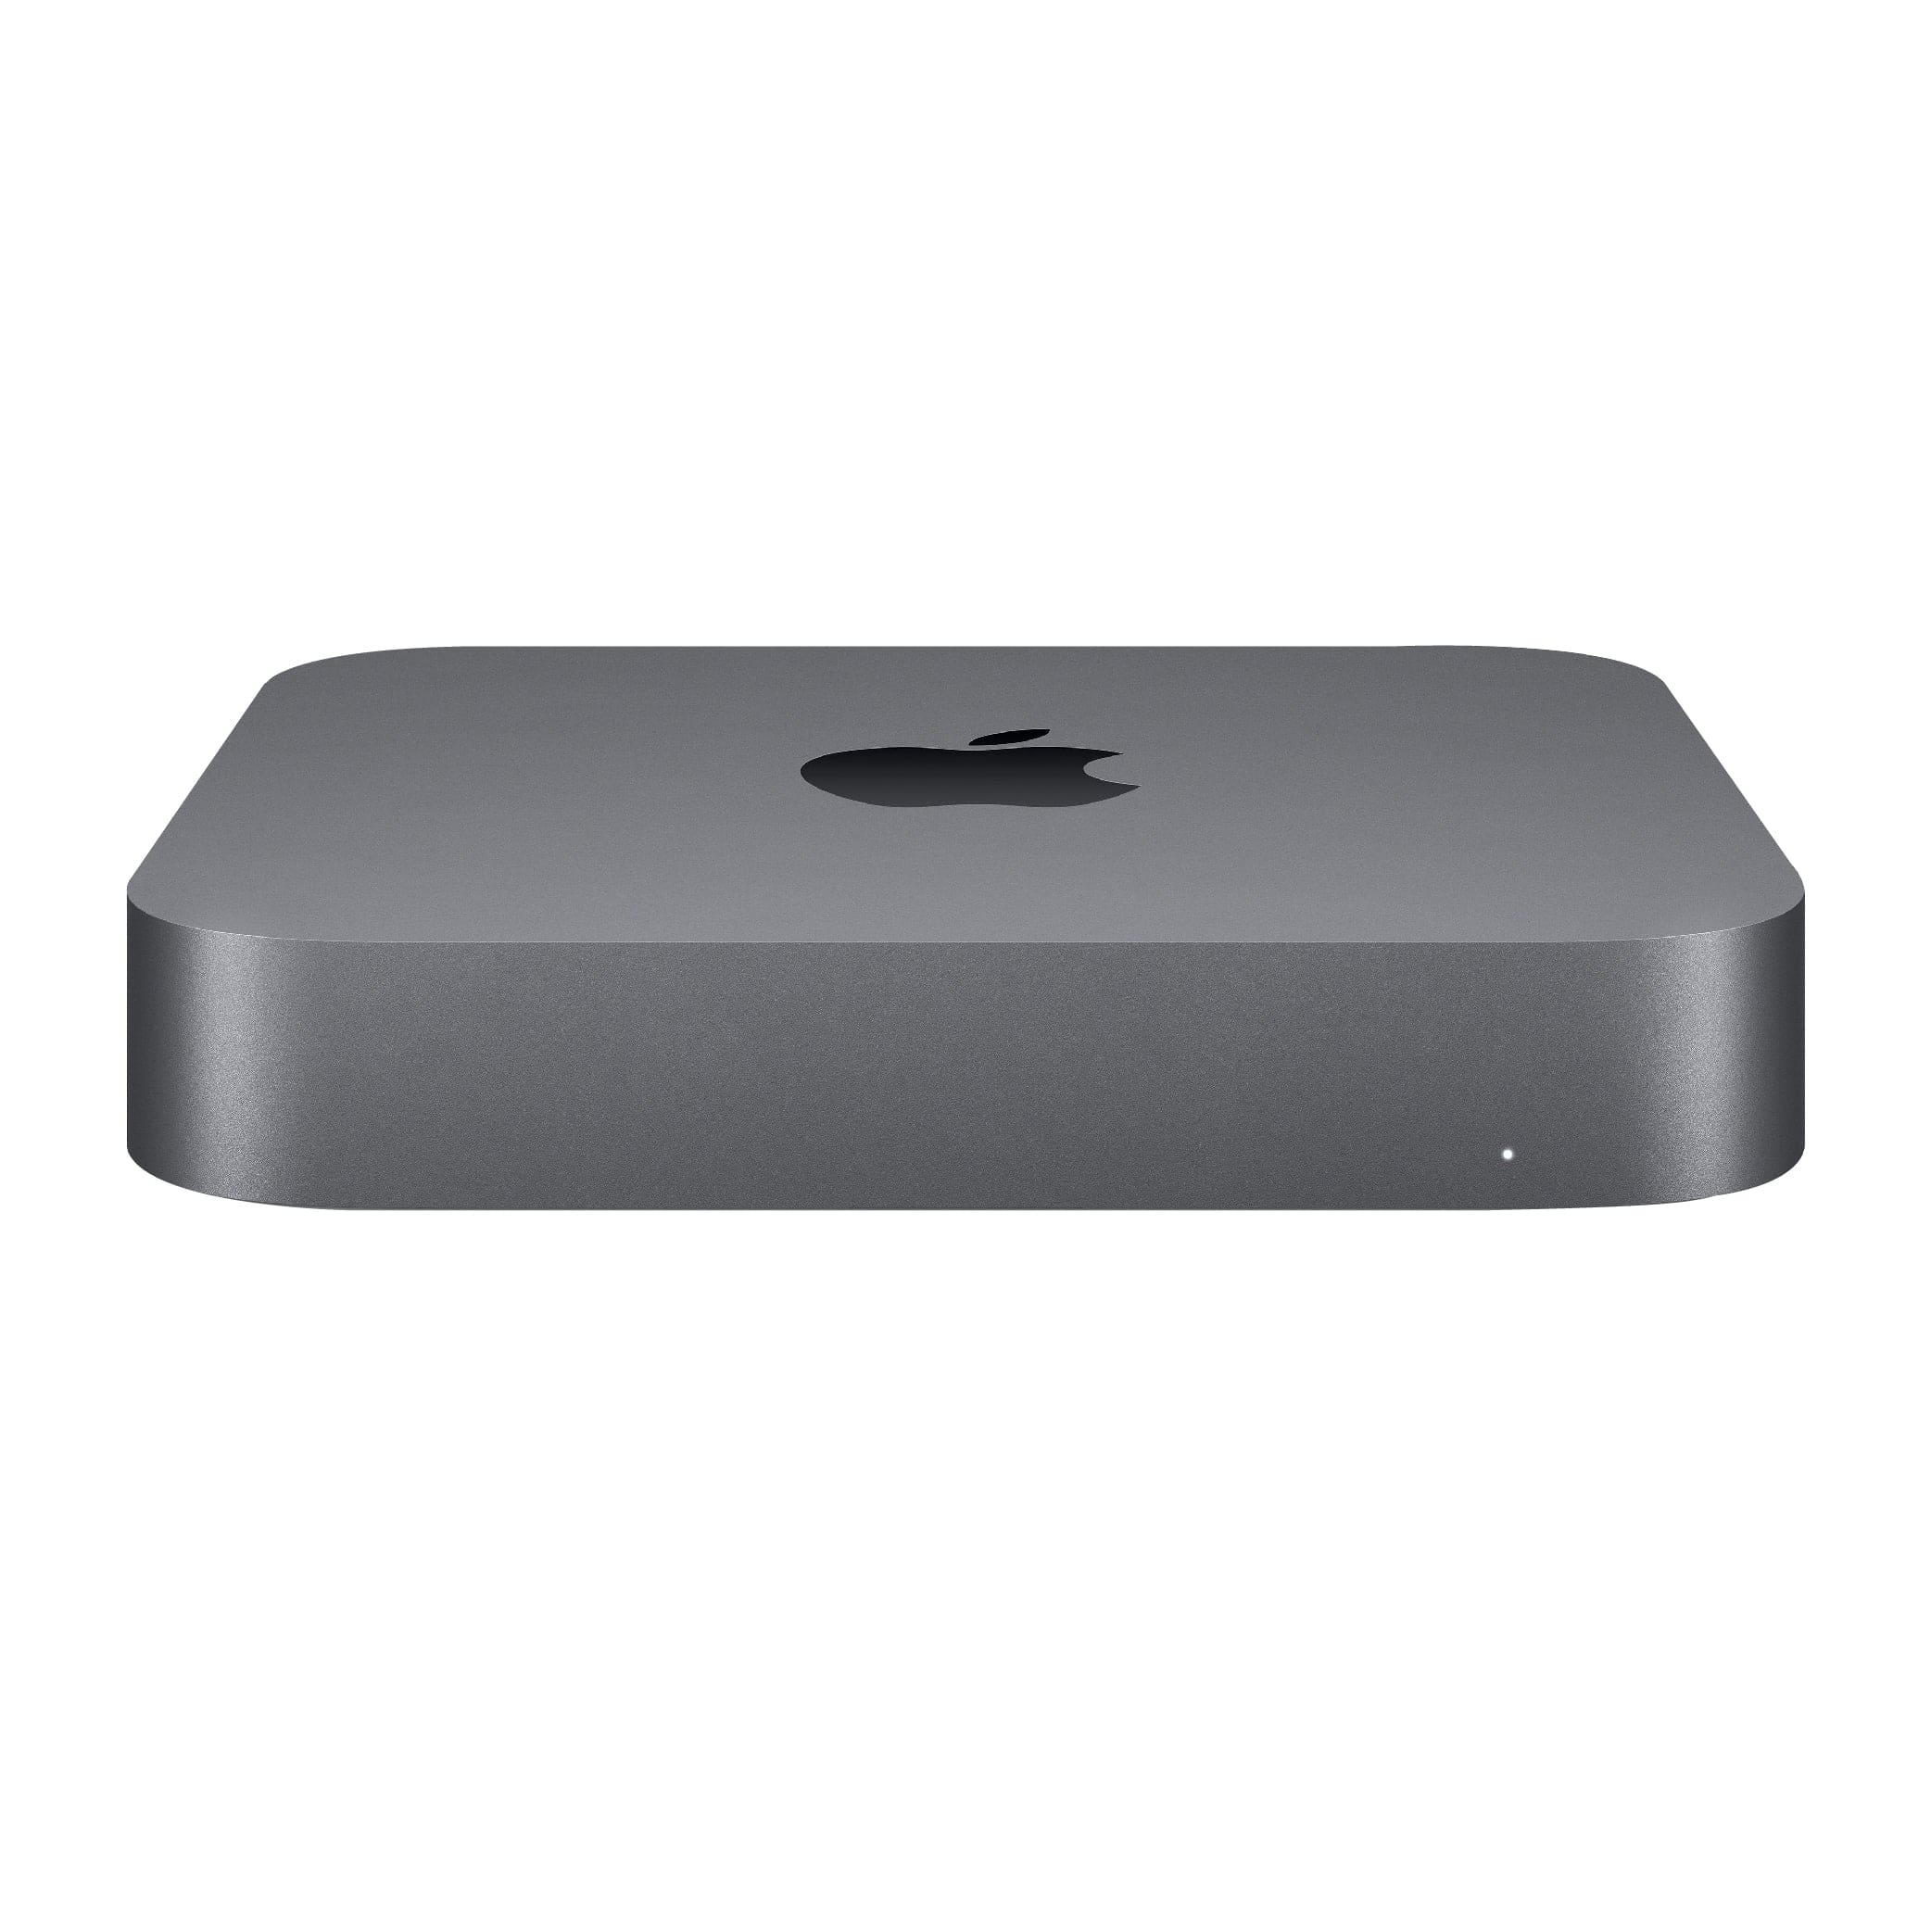 Apple - Mac mini Desktop MXNF2LL/A - Intel Core i3 - 8GB Memory - 256GB  Solid State Drive - Space Gray Refurbished-Excellent condition